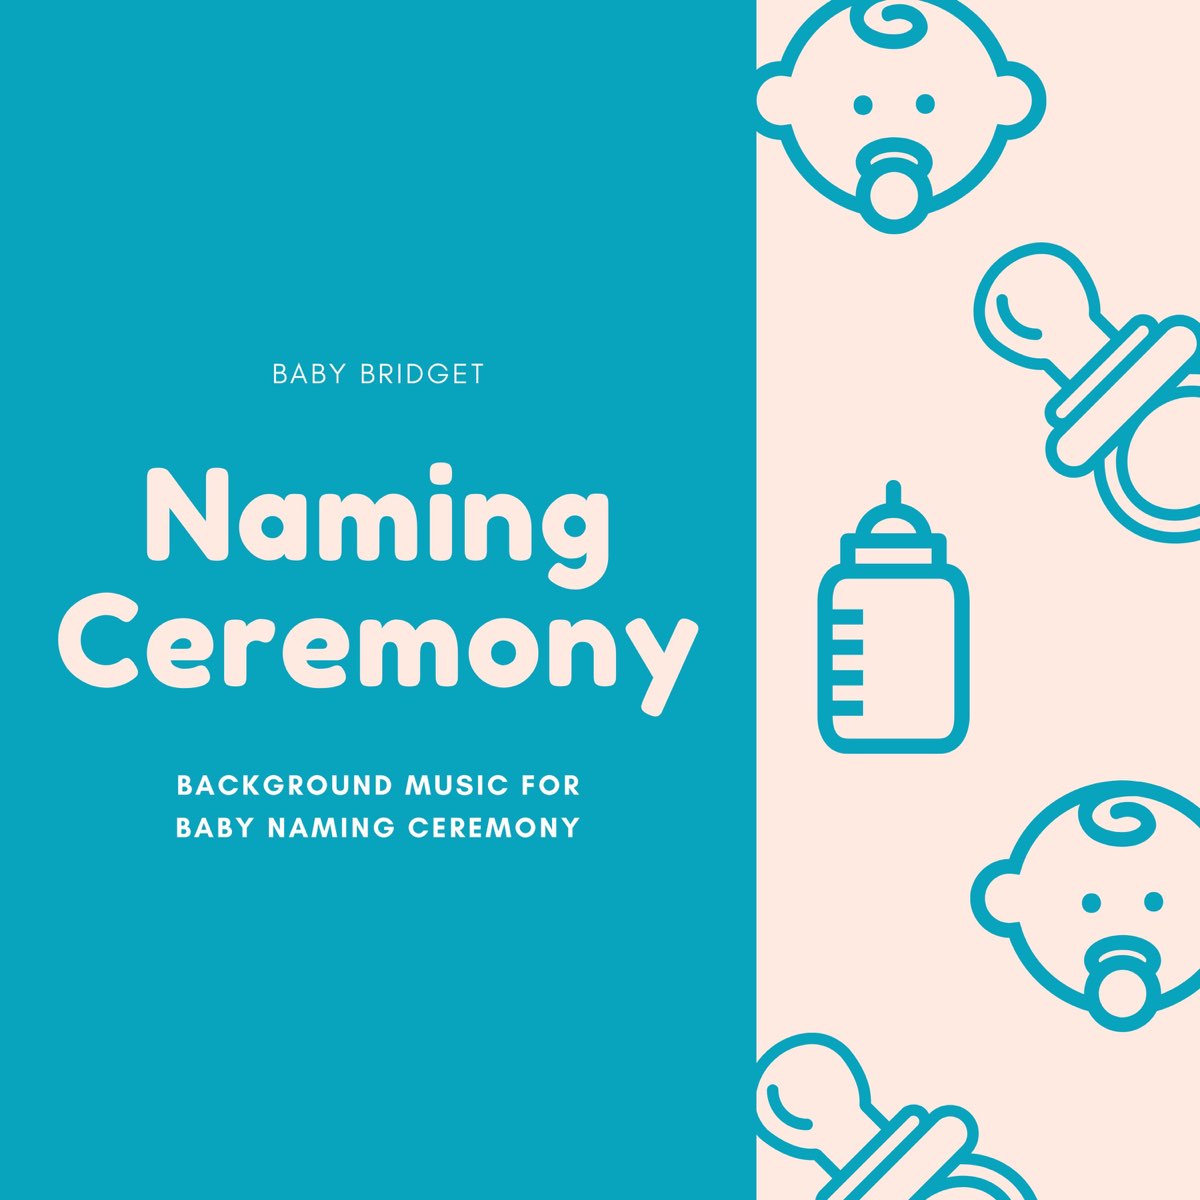 Naming Ceremony – Background Music for Baby Naming Ceremony, Songs for a  Naming Day by Baby Bridget on Apple Music